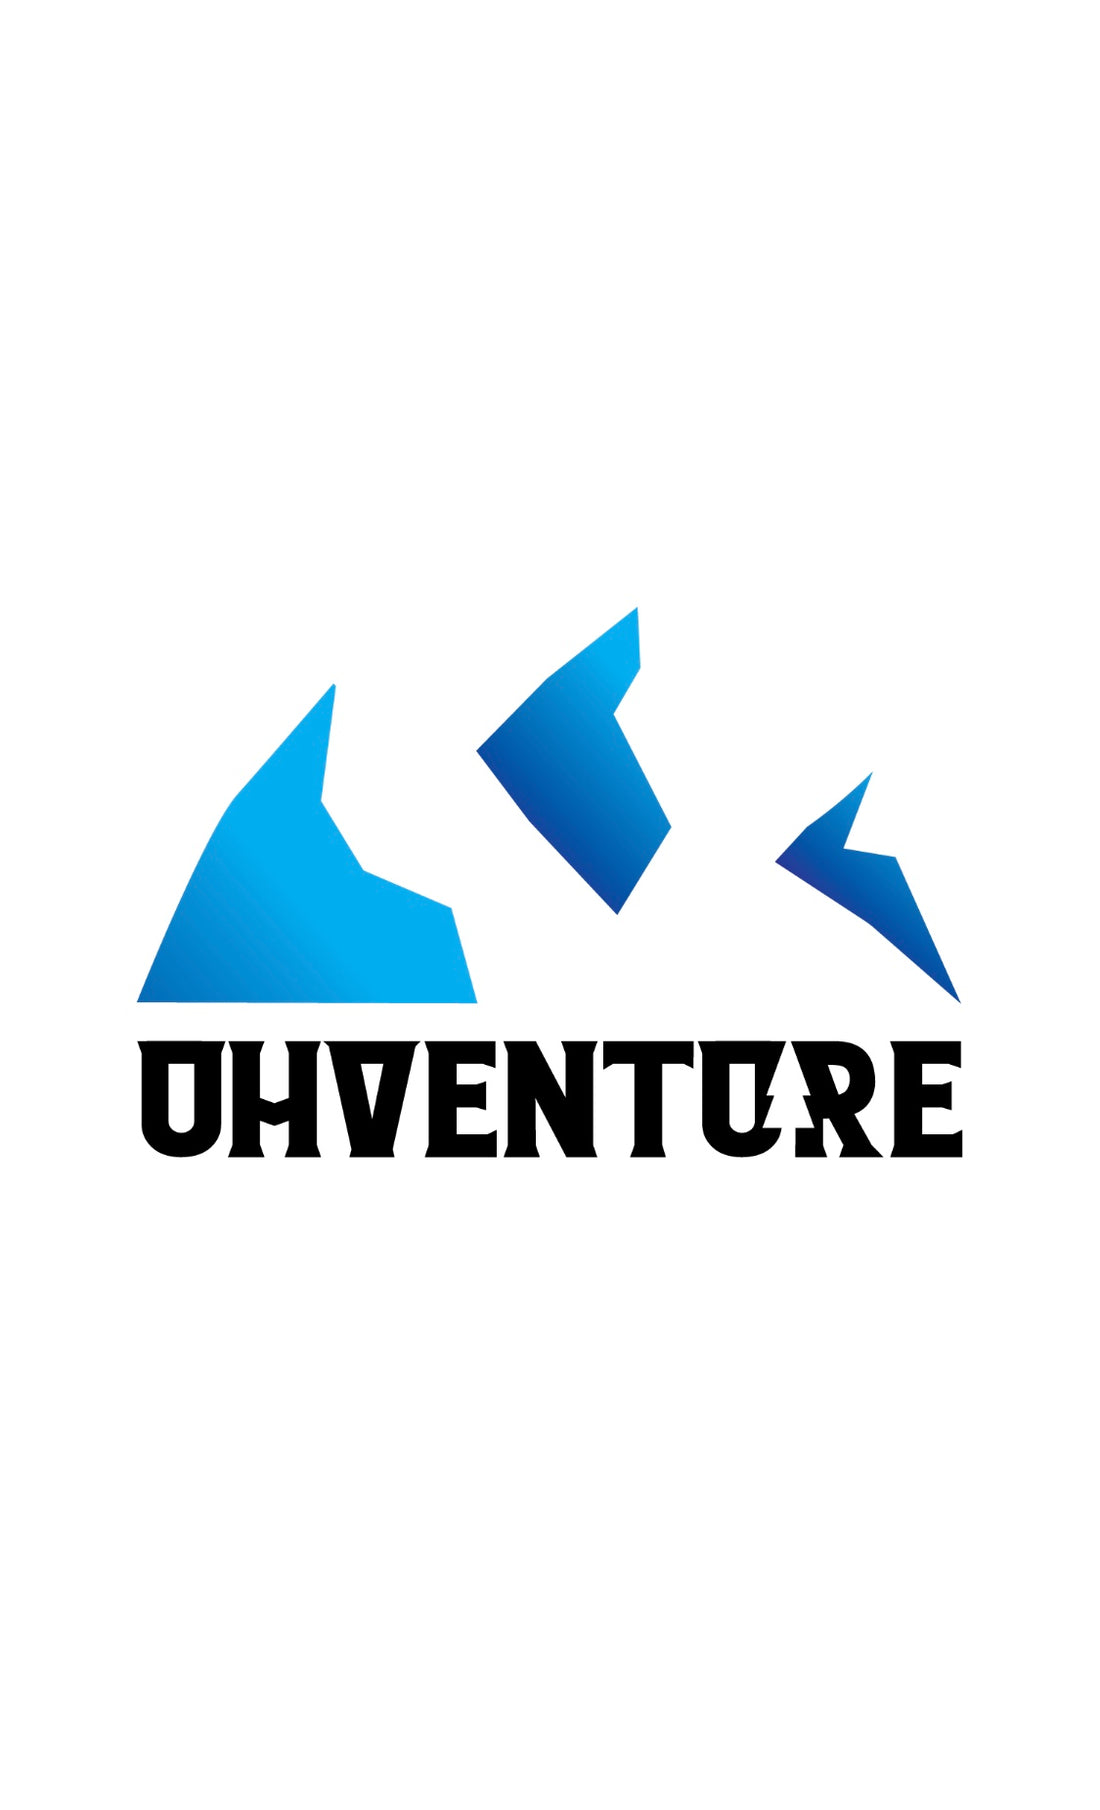 What is Uhventure?